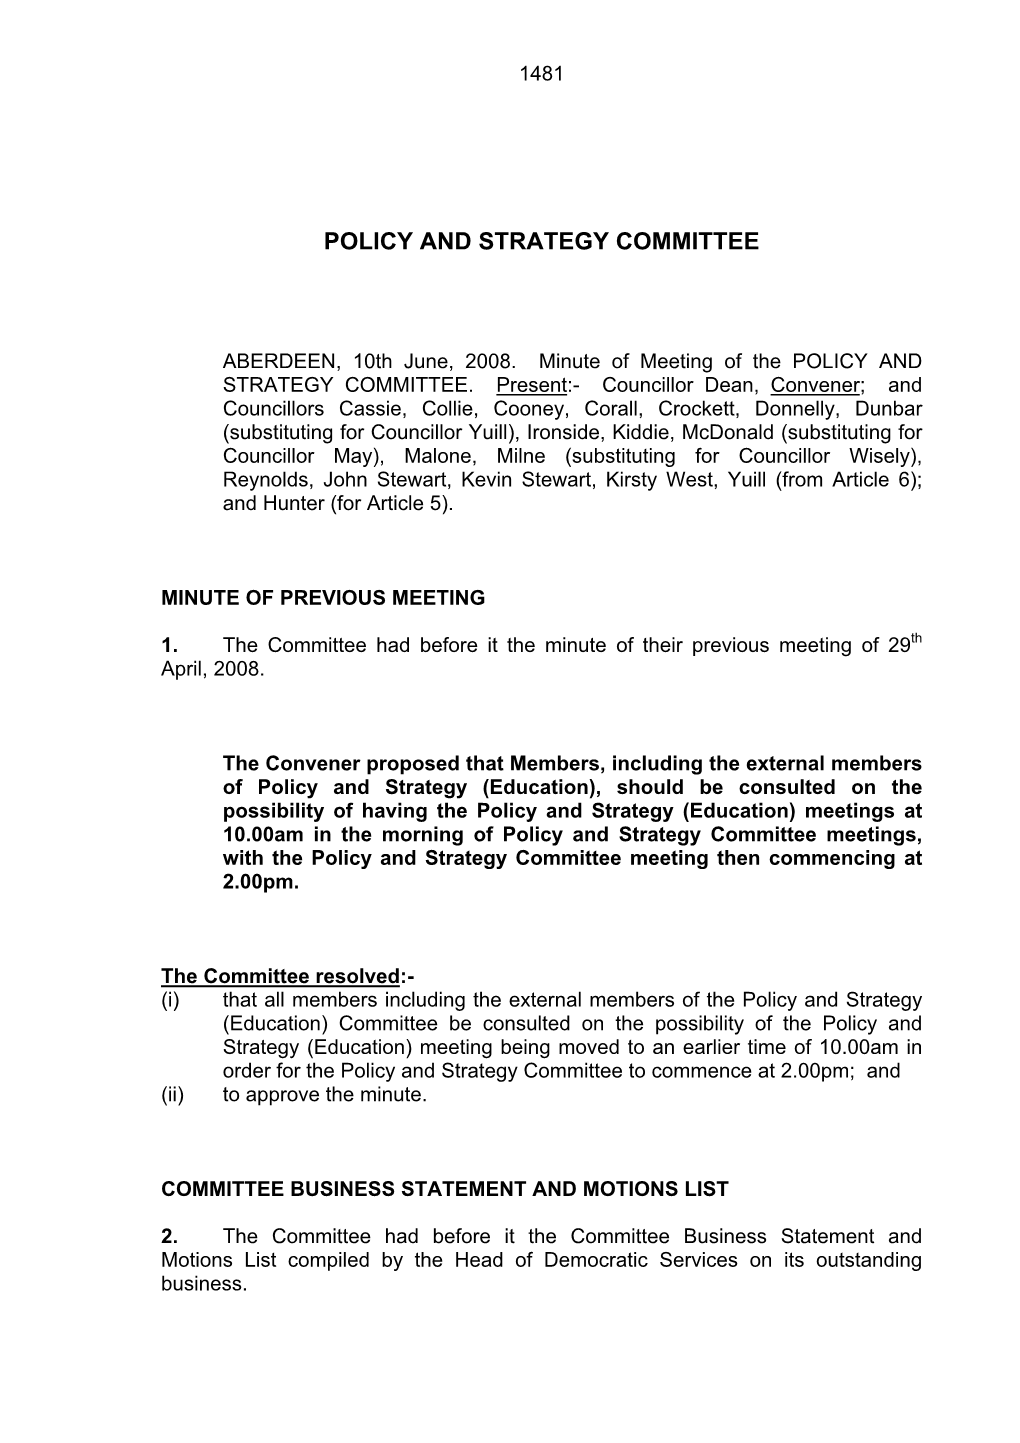 Policy and Strategy Committee